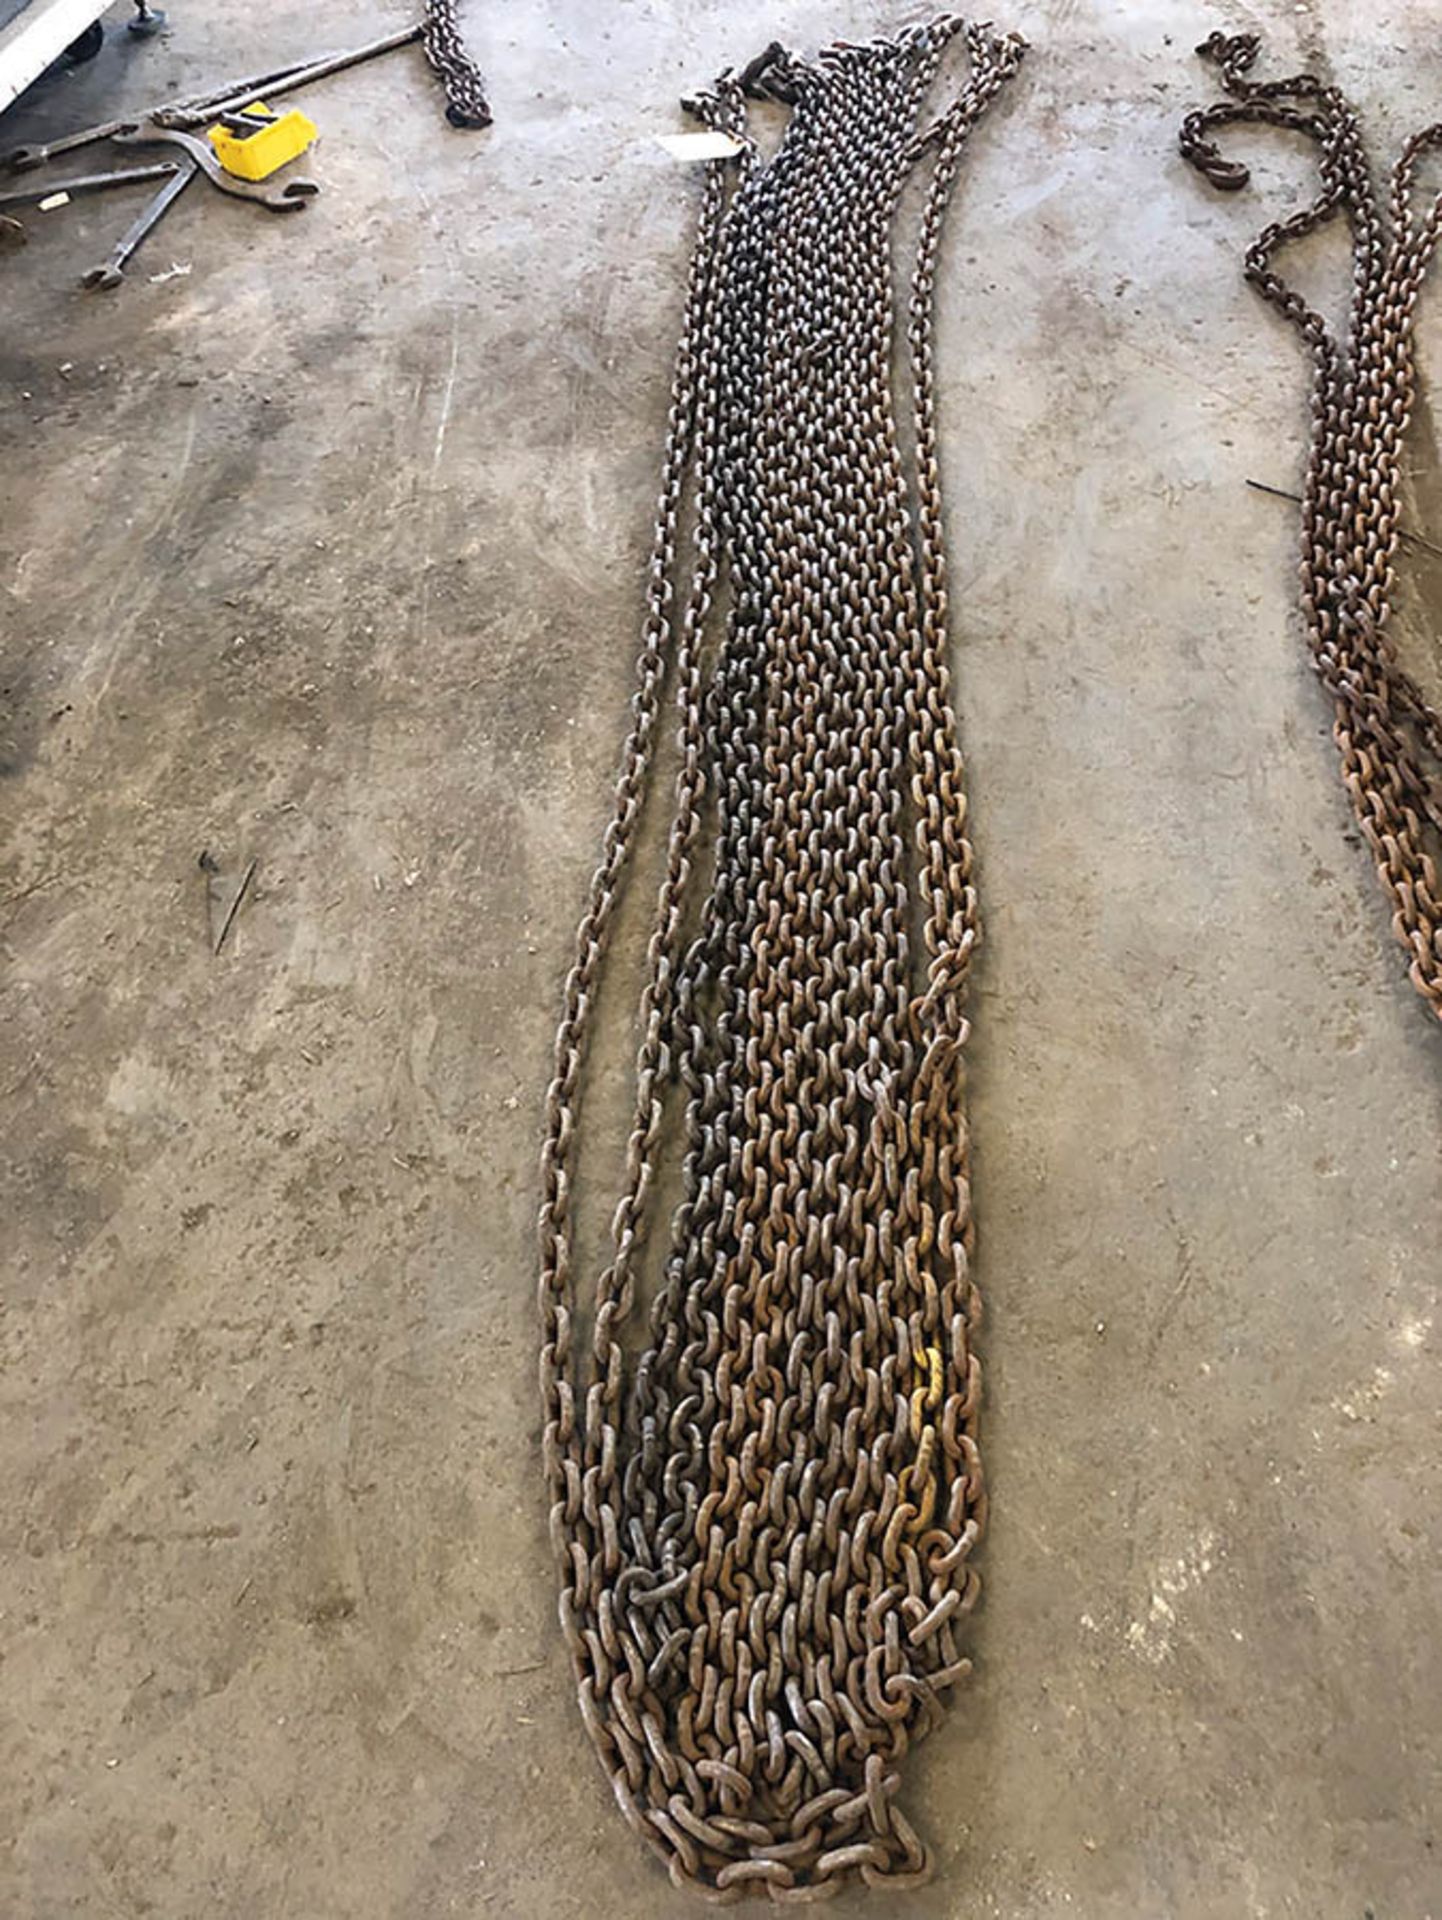 (LOT) OF (7) 20' LONG TRANSPORT CHAINS